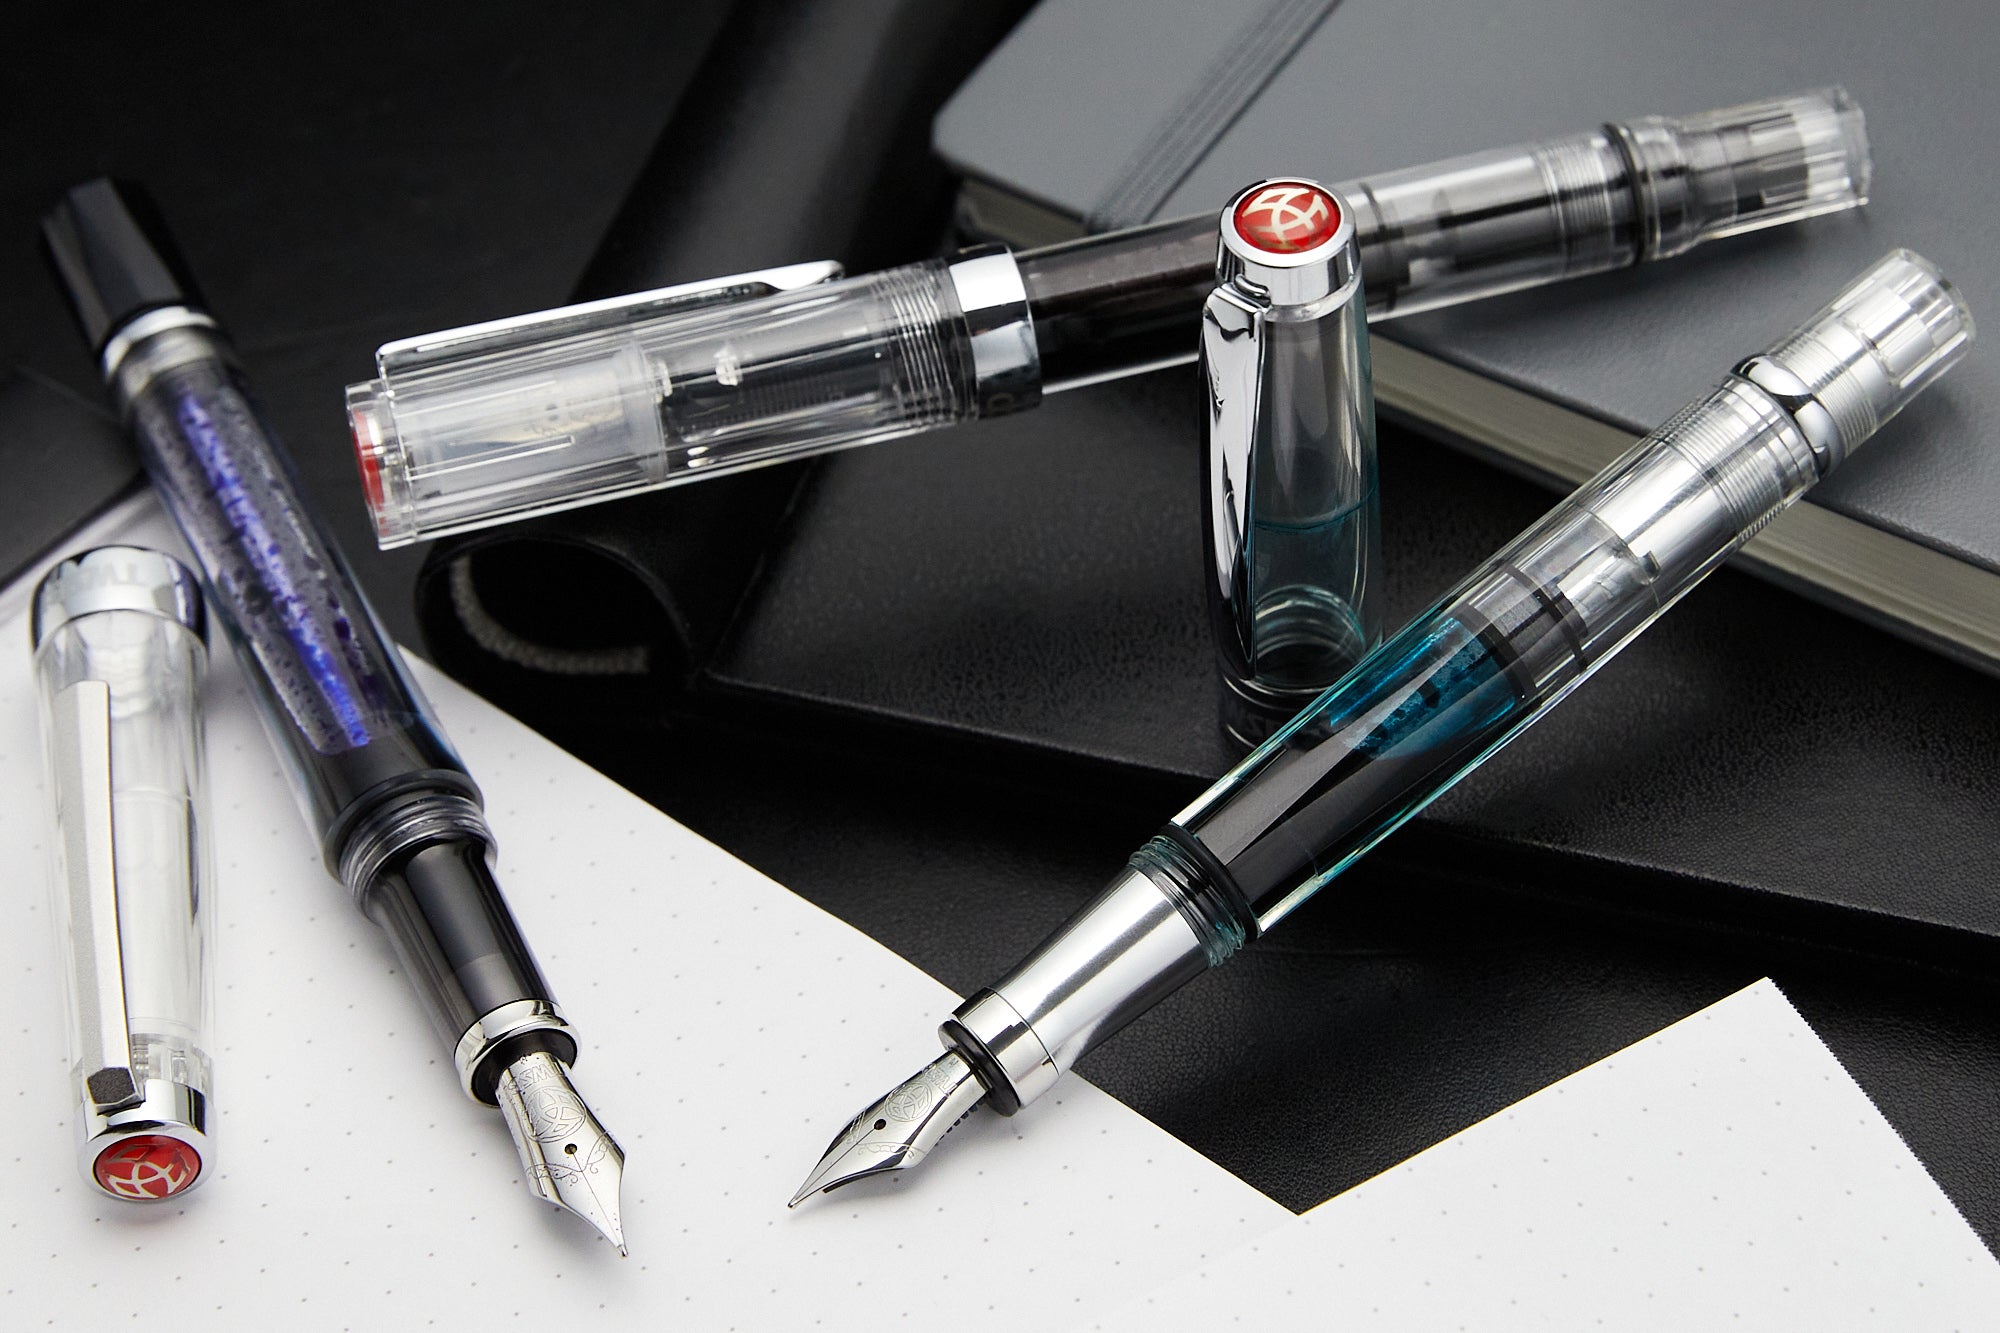 TWSBI fountain pens with various colors of ink inside